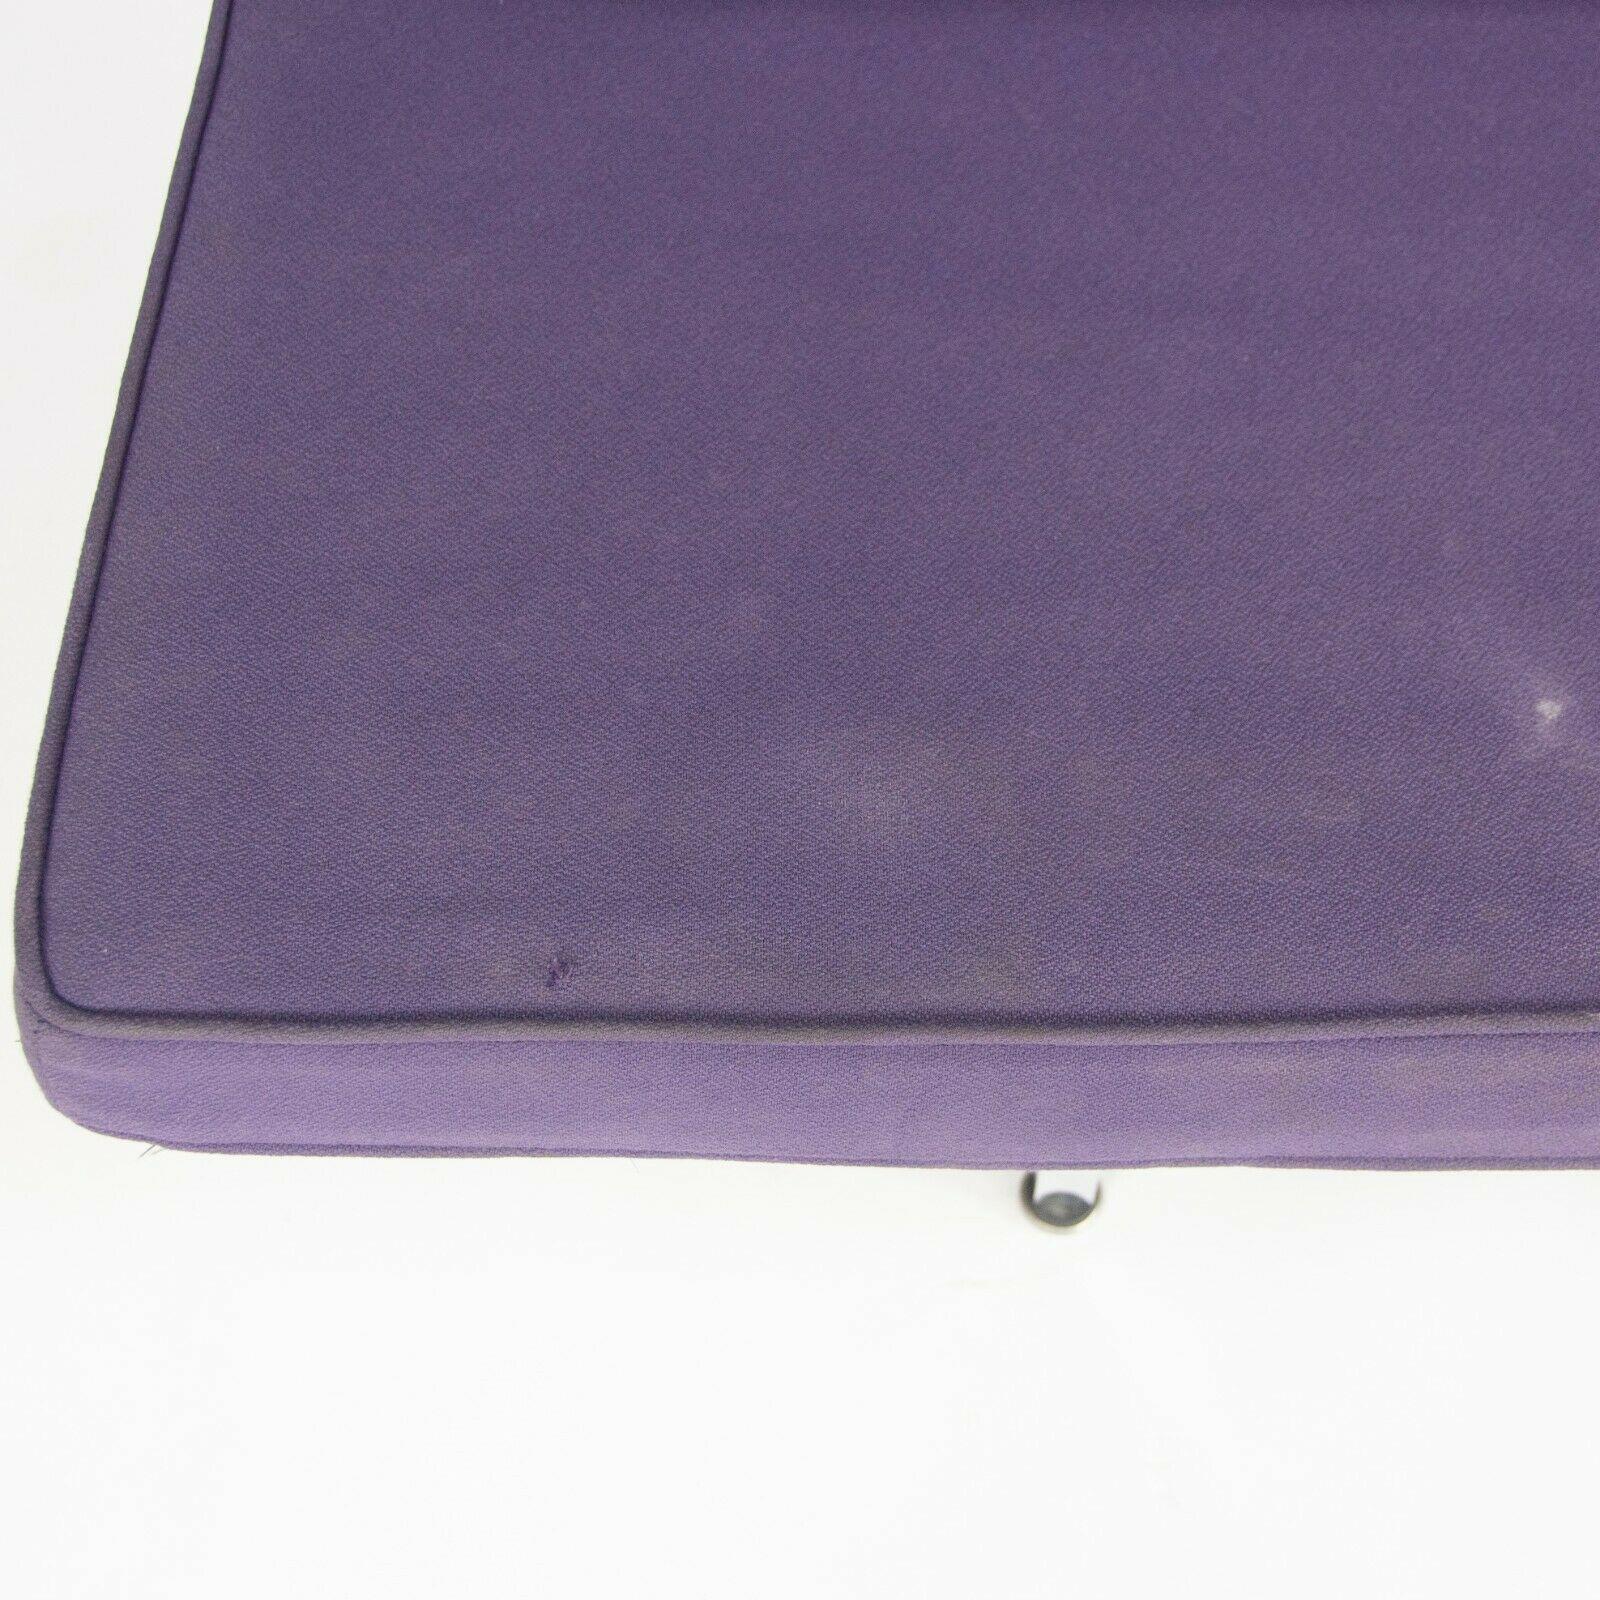 2006 Herman Miller Ray and Charles Eames Sofa Compact Purple Fabric Upholstery (Canapé compact en tissu violet) en vente 1